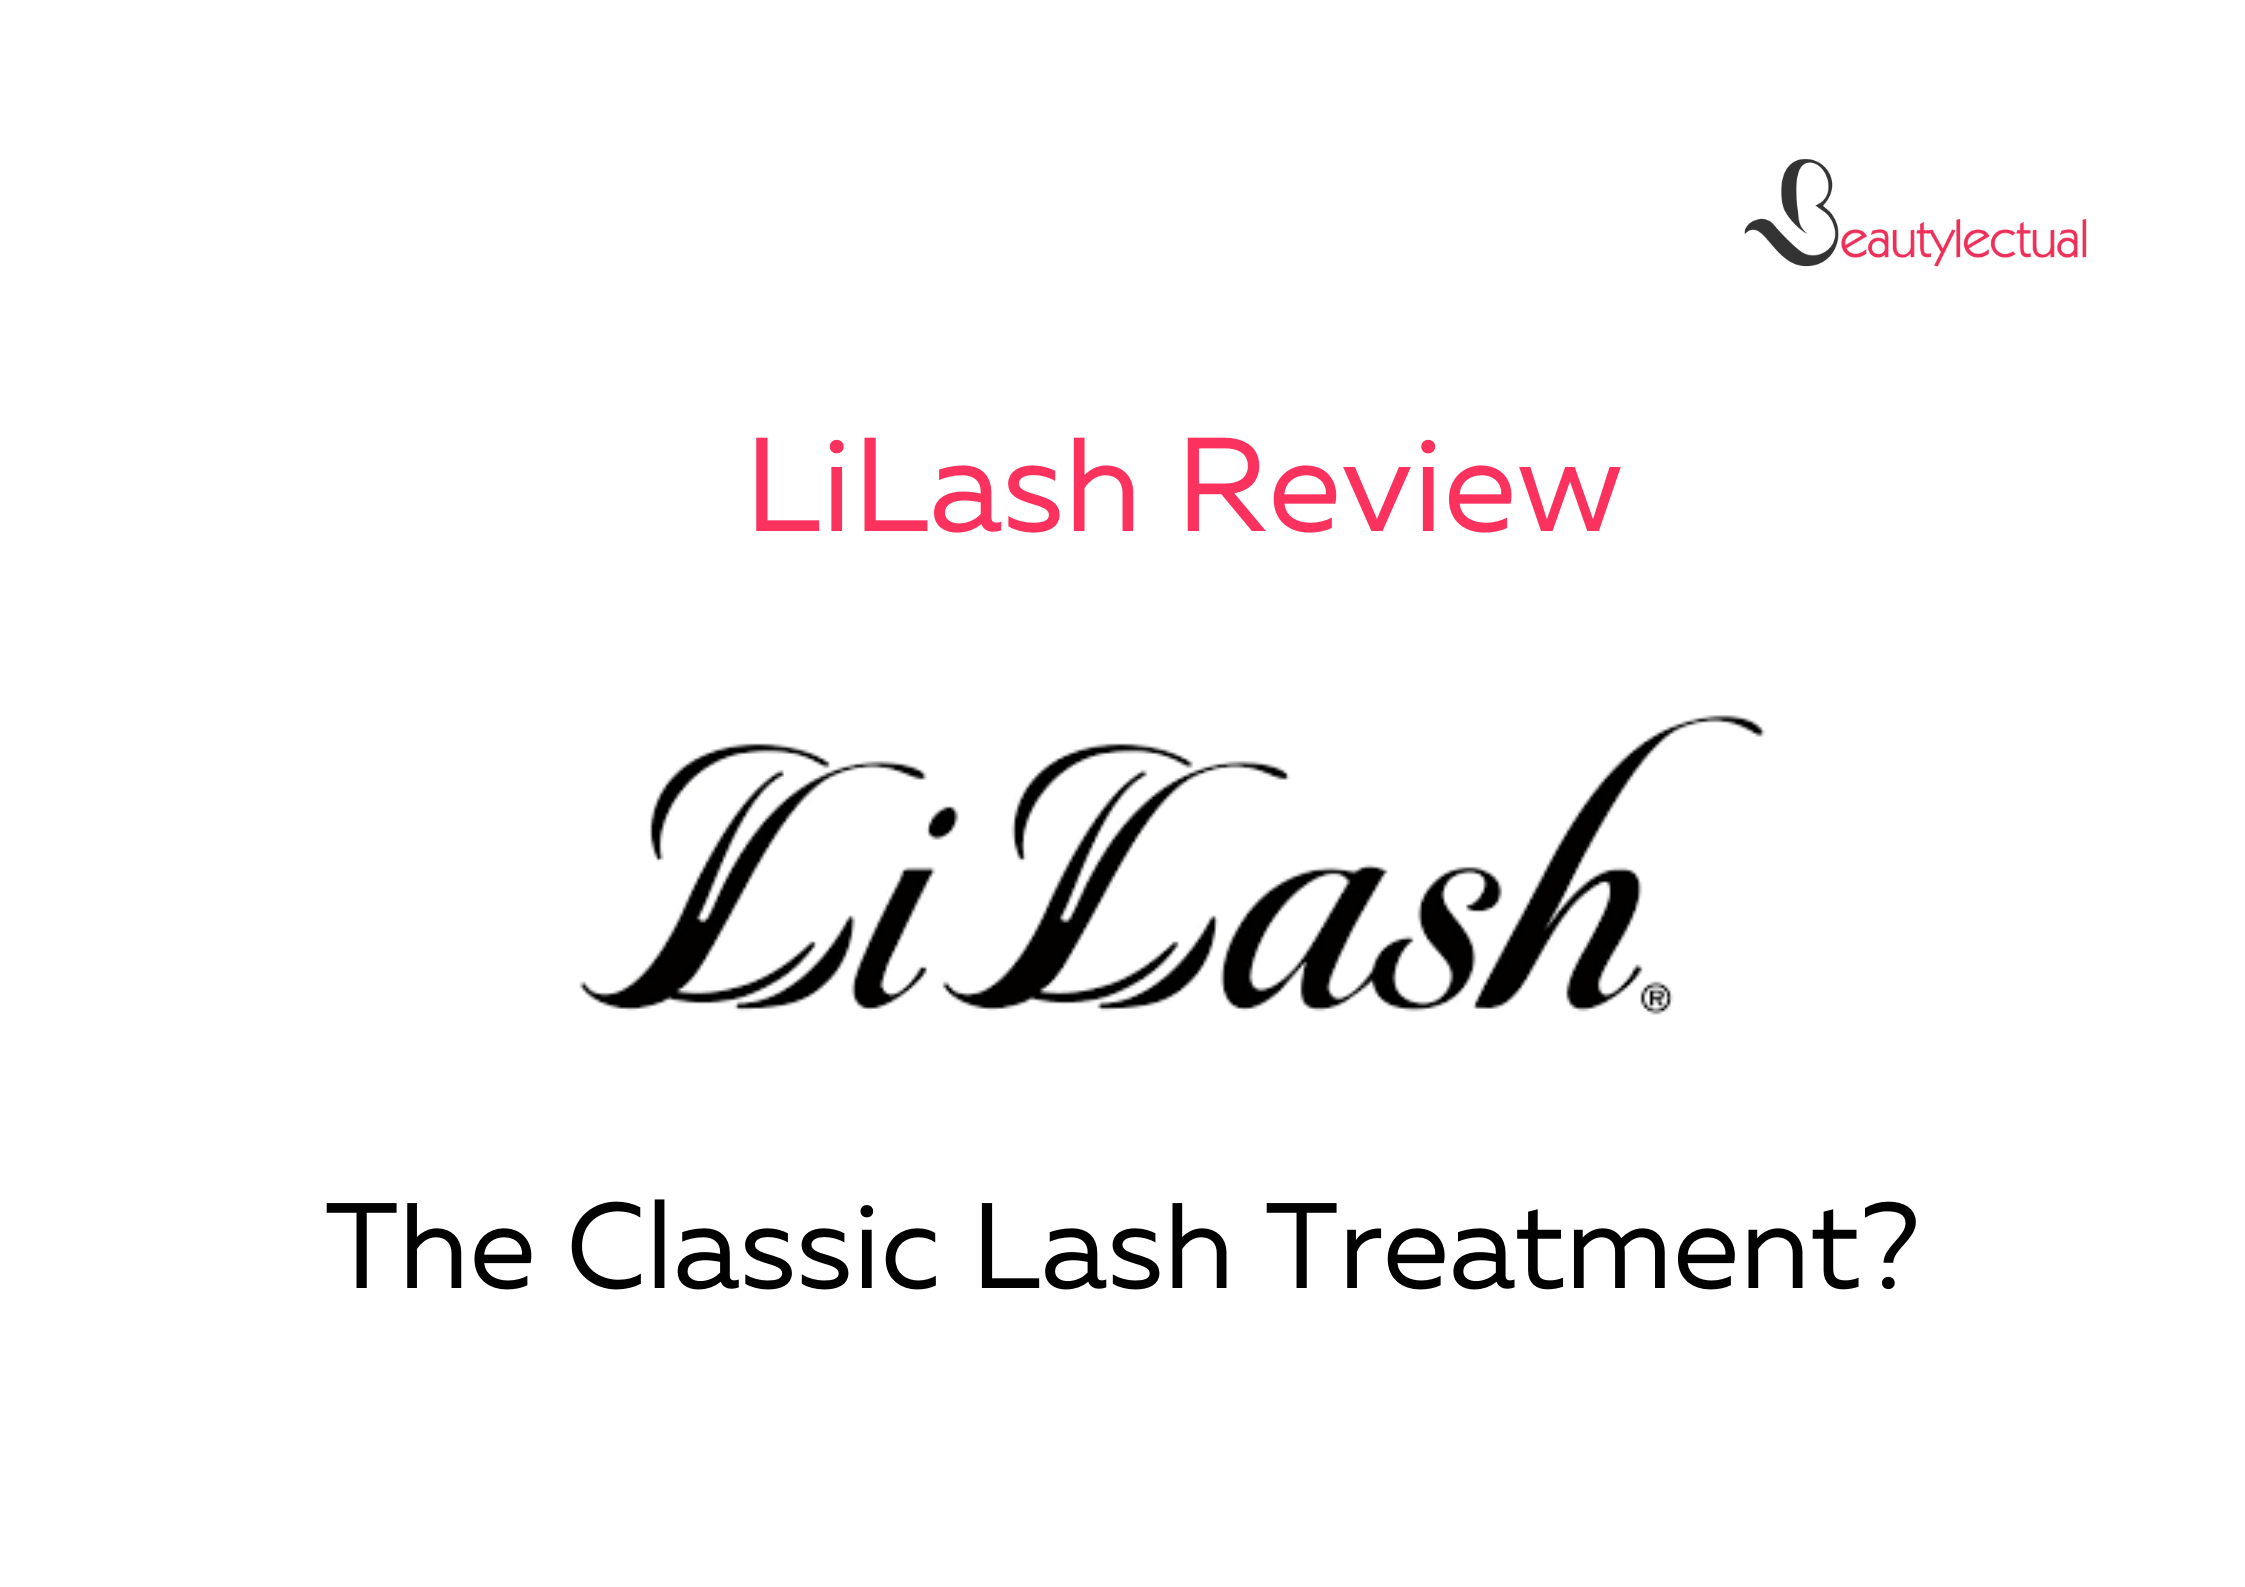 LiLash Review